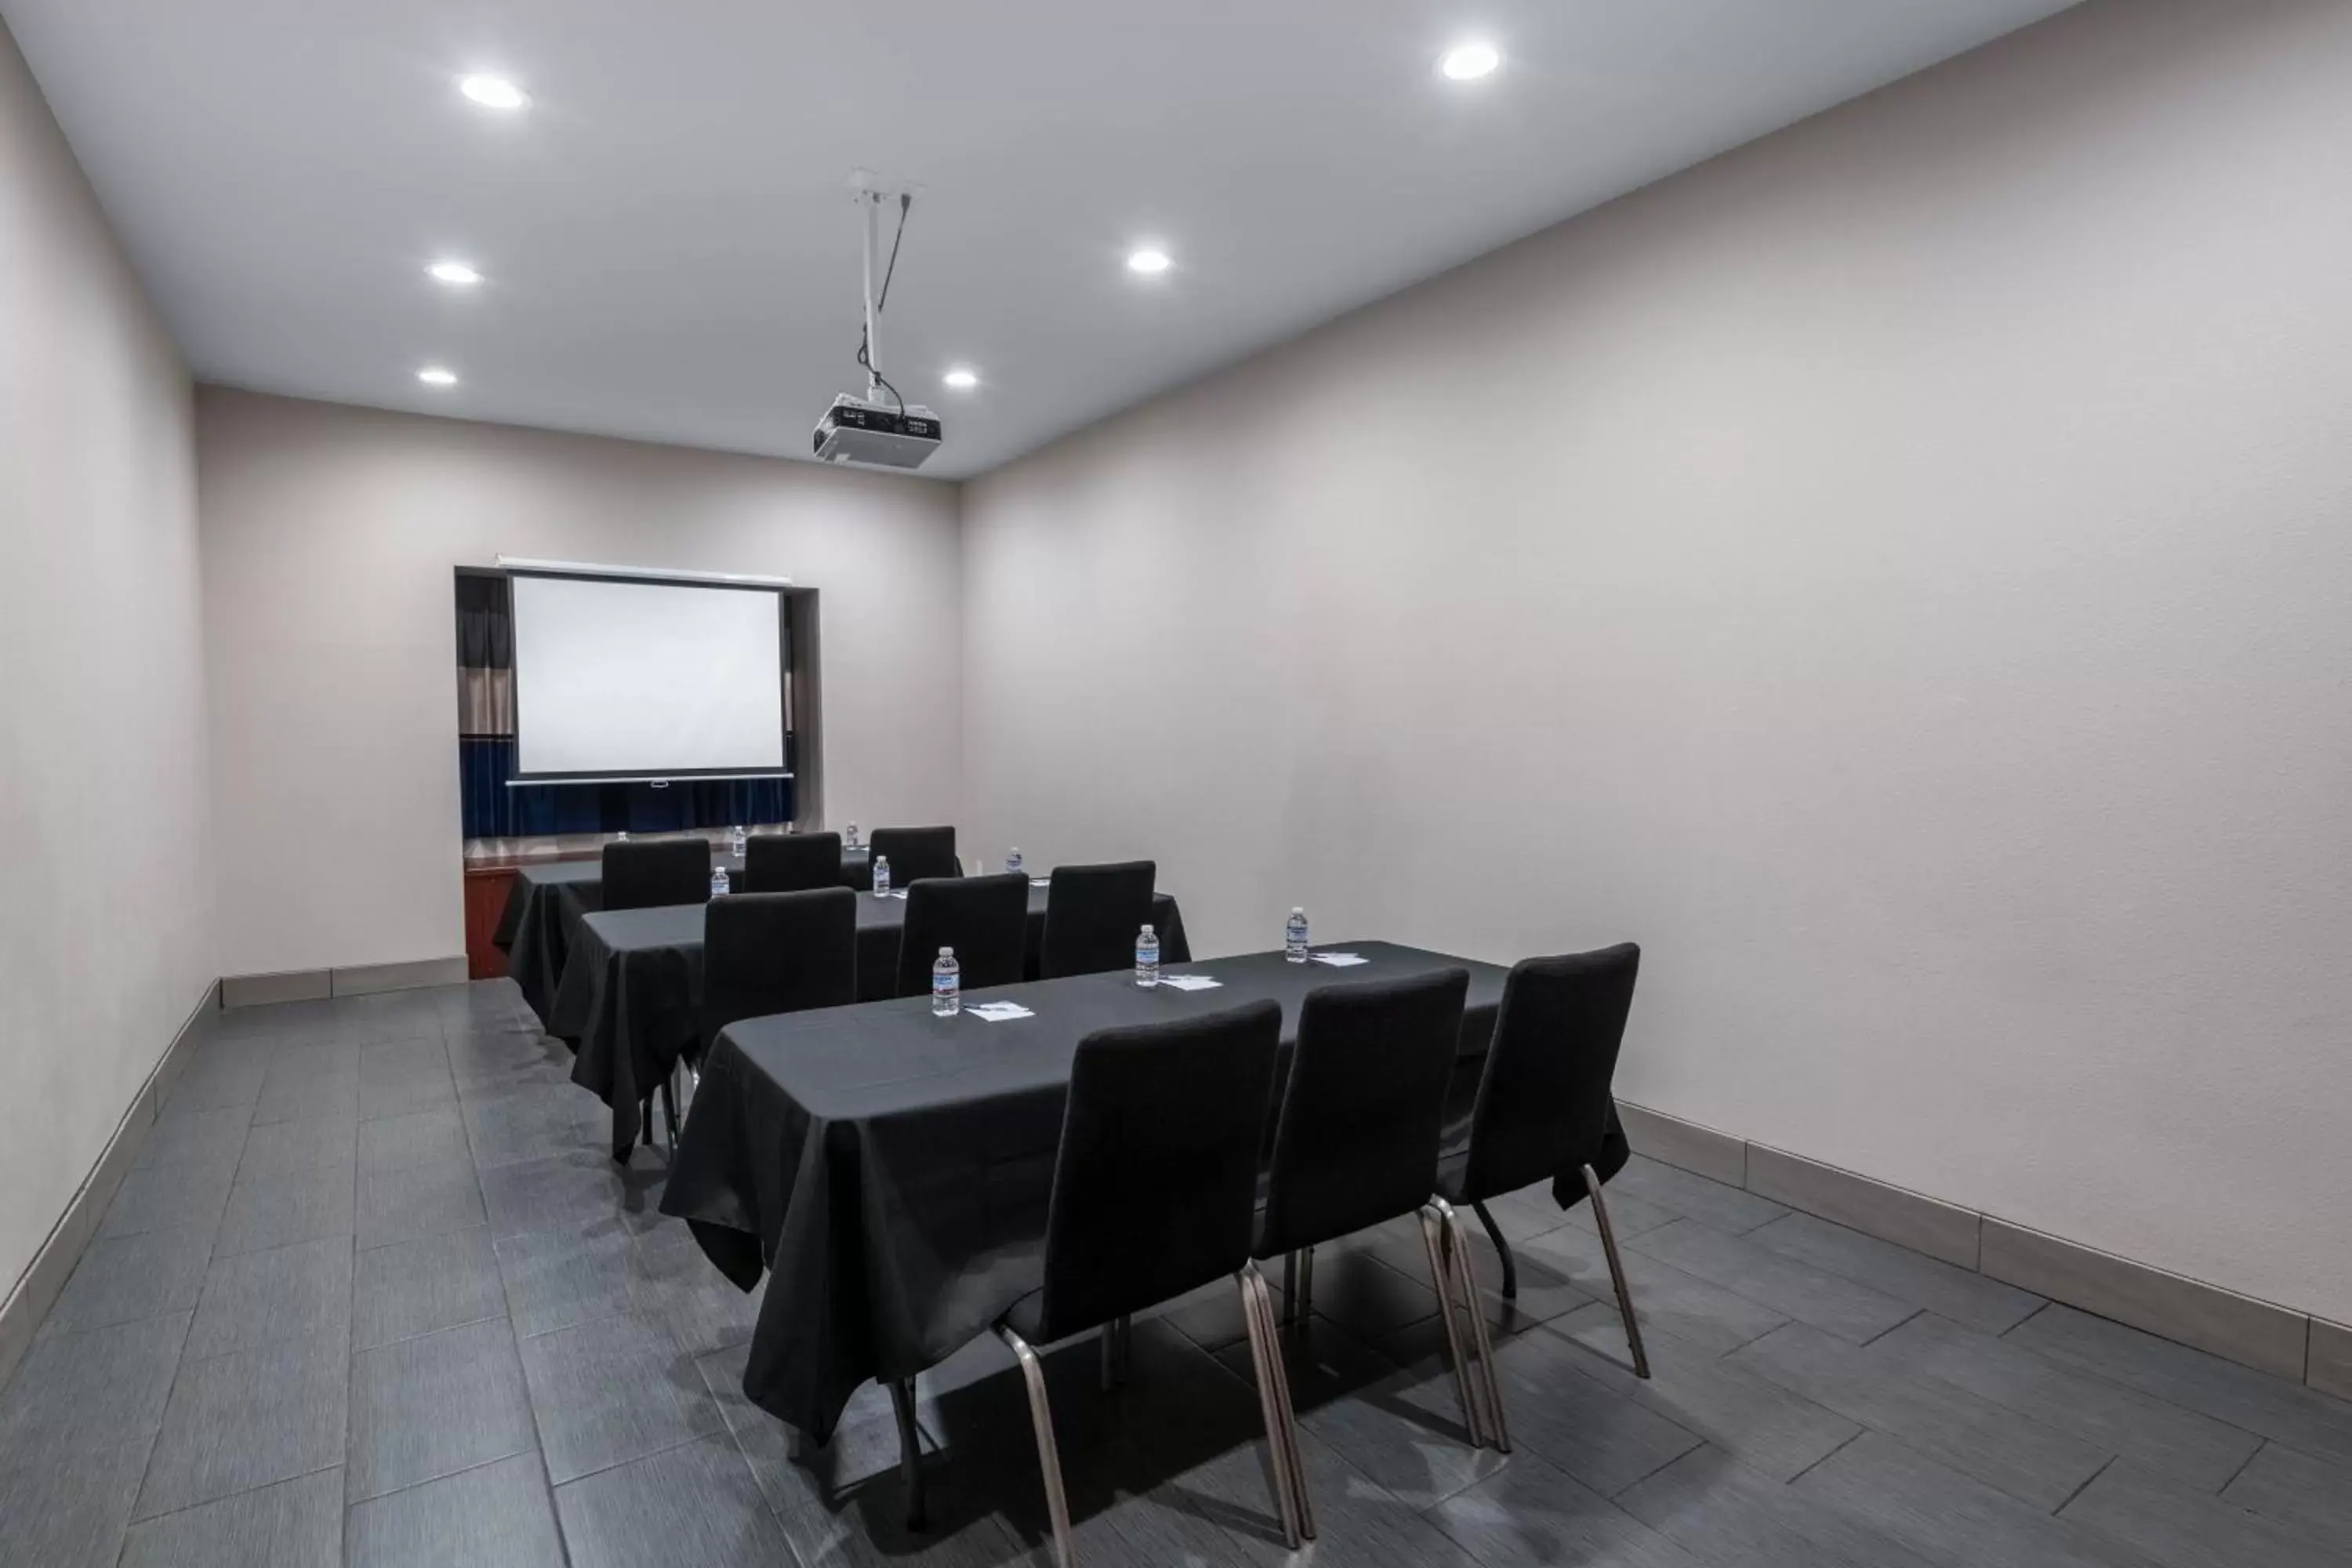 Meeting/conference room in Microtel Inn & Suites by Wyndham Tracy